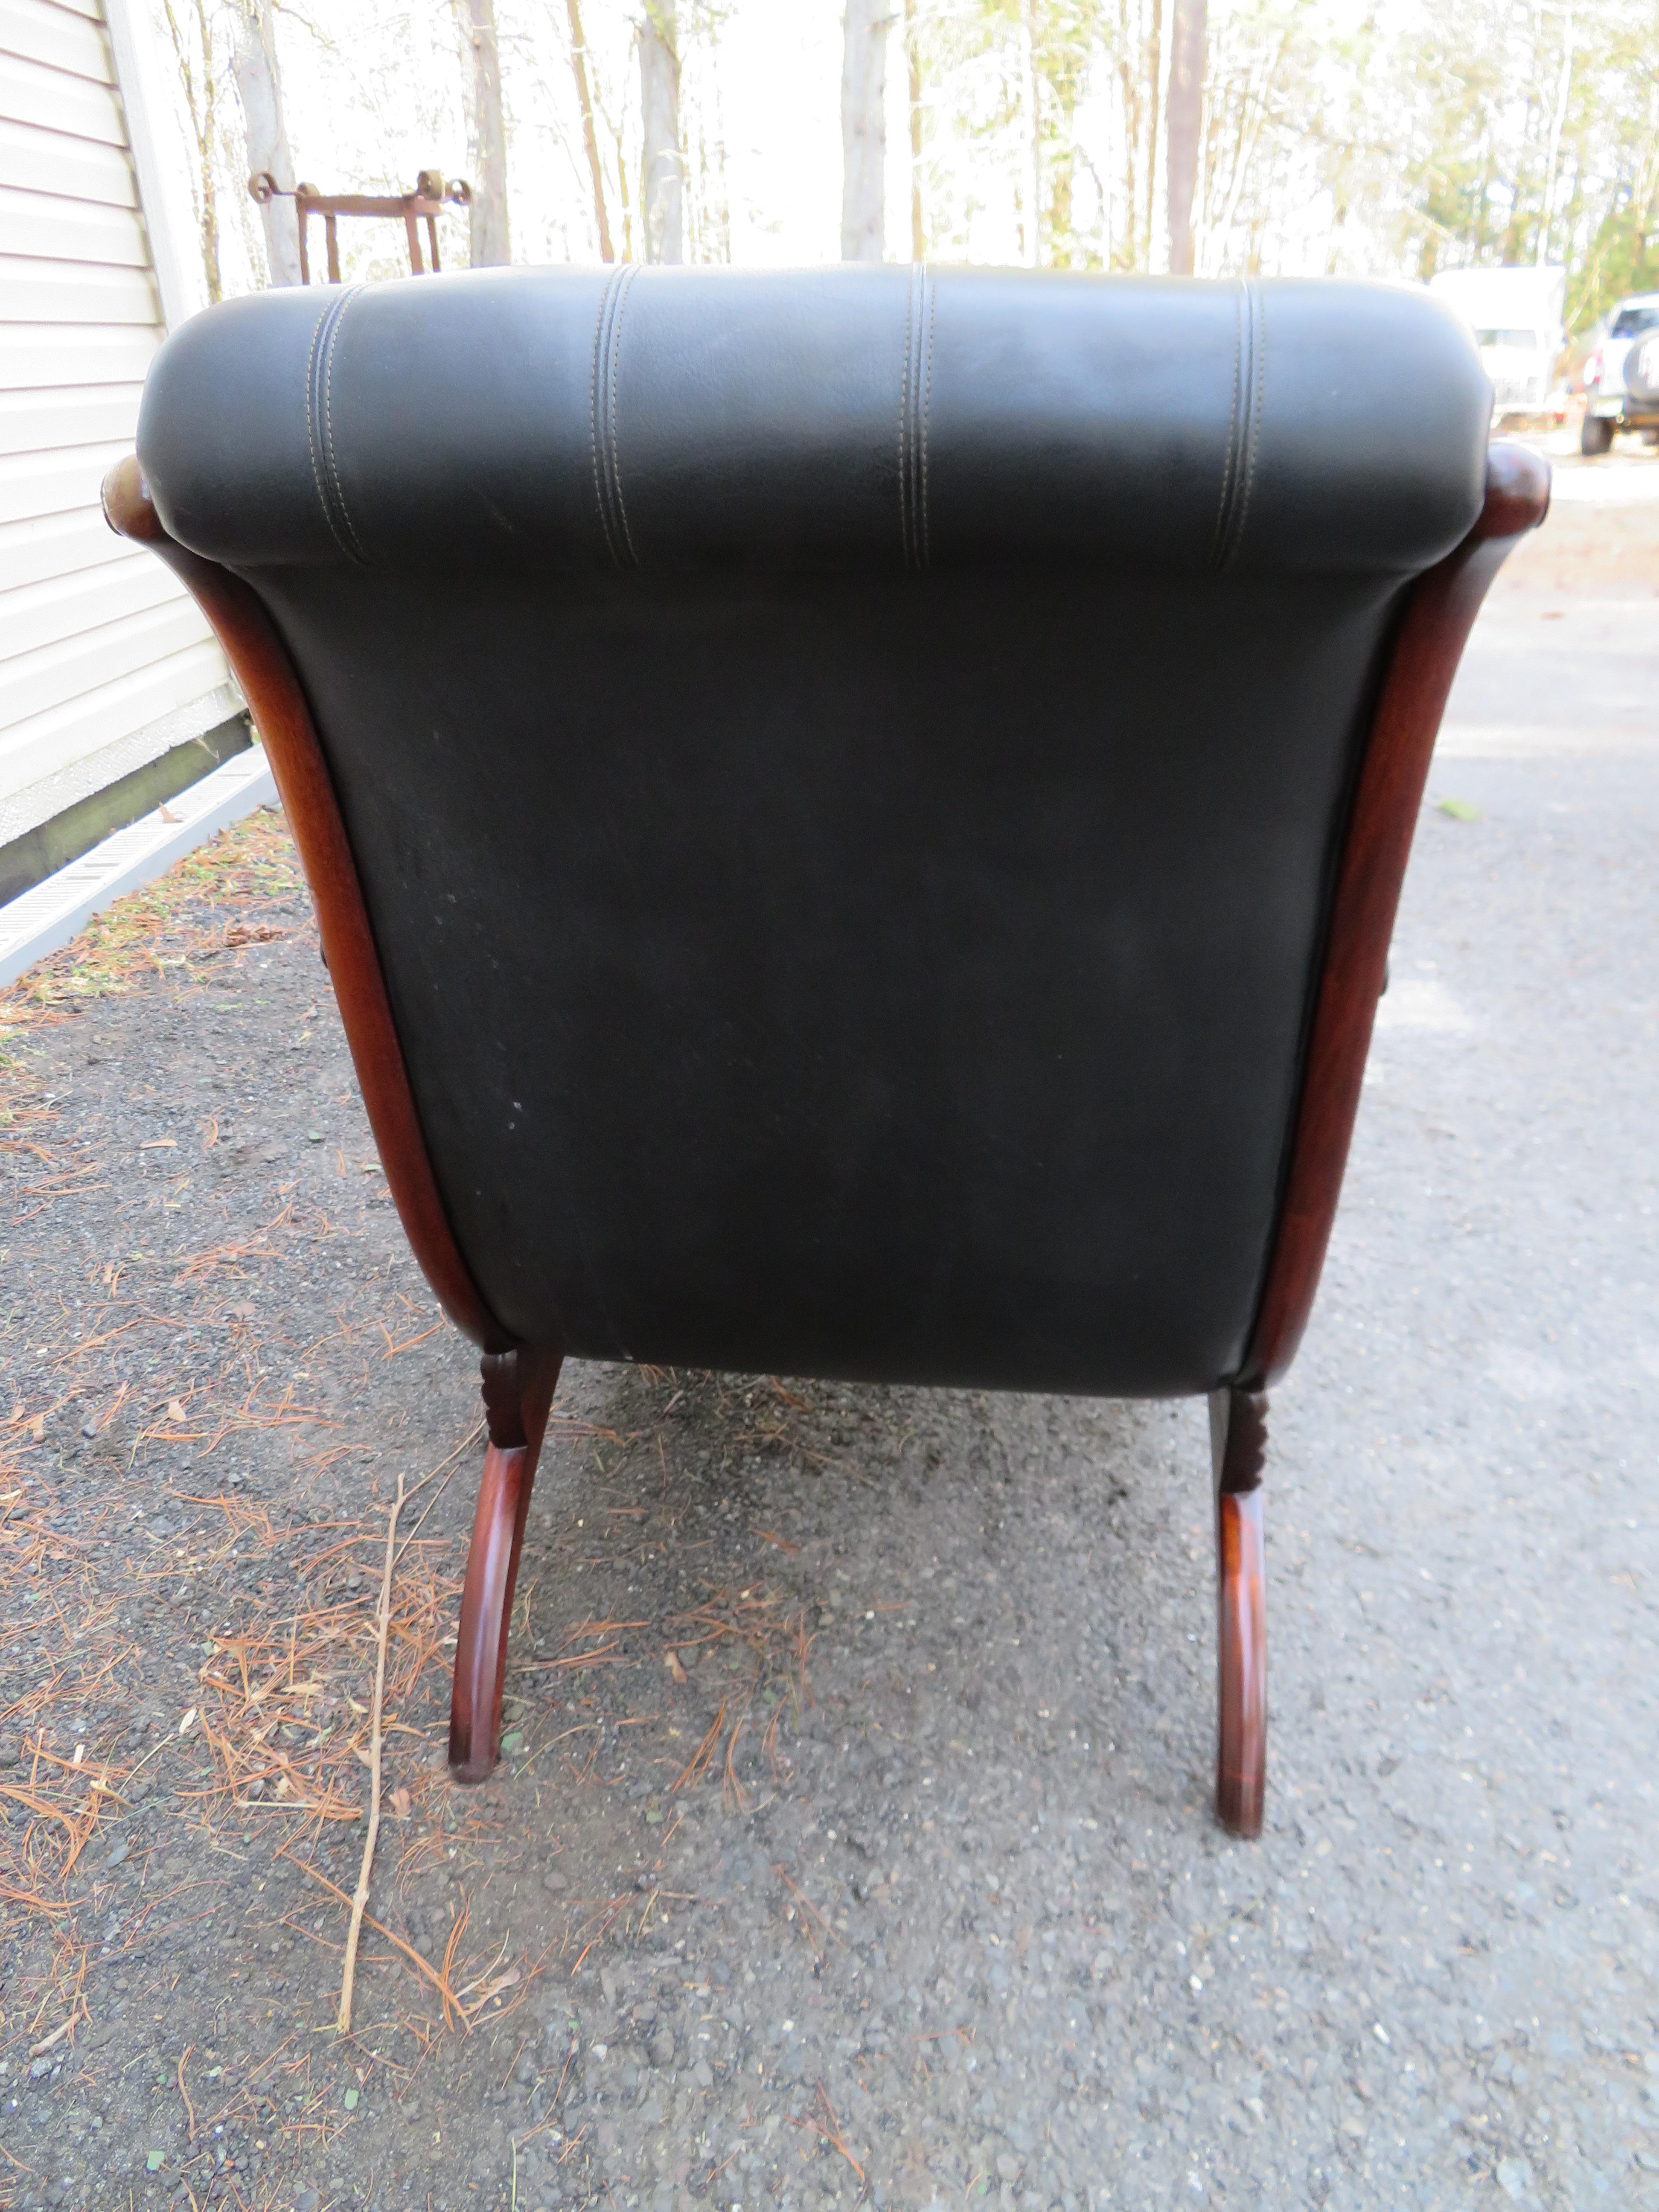 Mahogany French Campaign Style Lounge Chair & Ottoman Set Mid-Century Modern In Good Condition For Sale In Pemberton, NJ